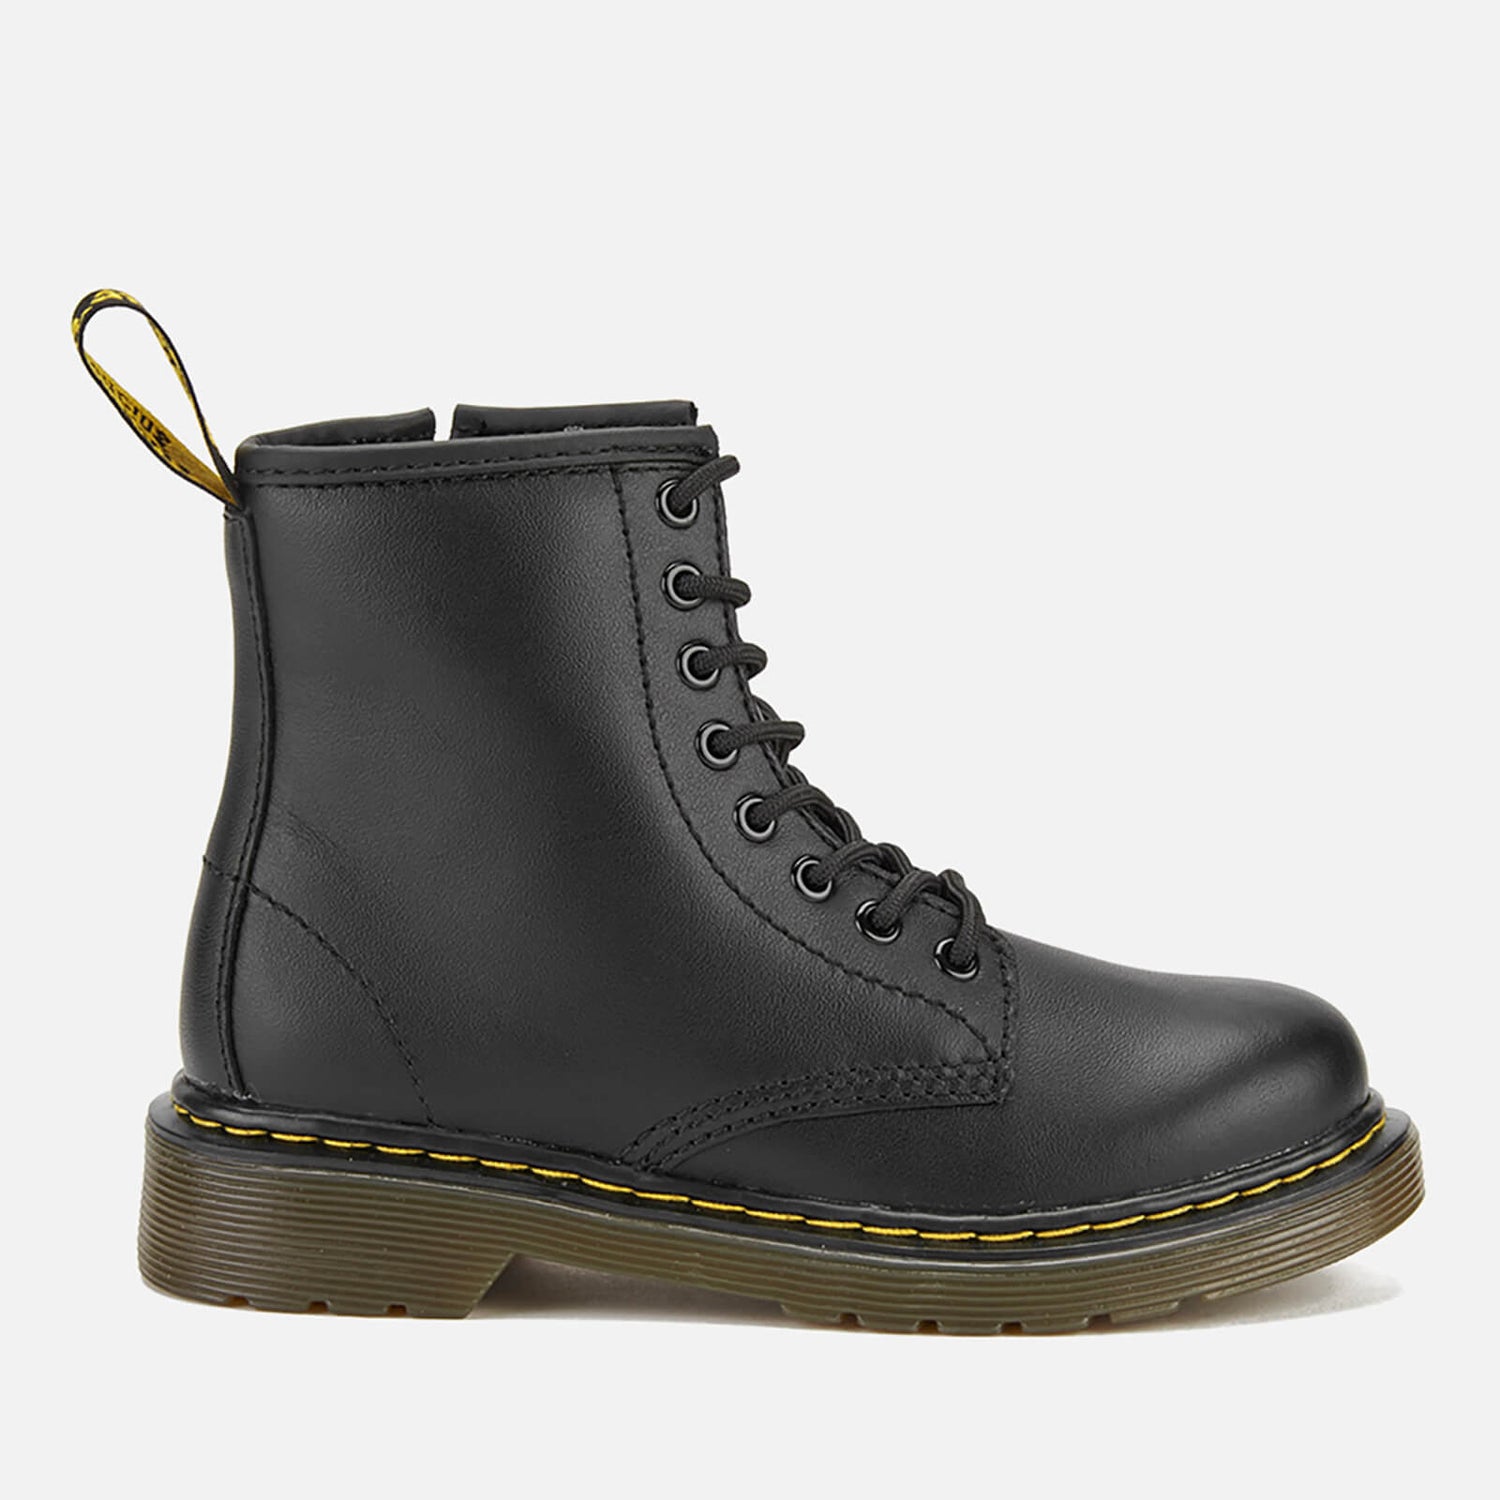 Dr. Martens Kids' 1460 Softy Leather Lace-Up Boots - Black